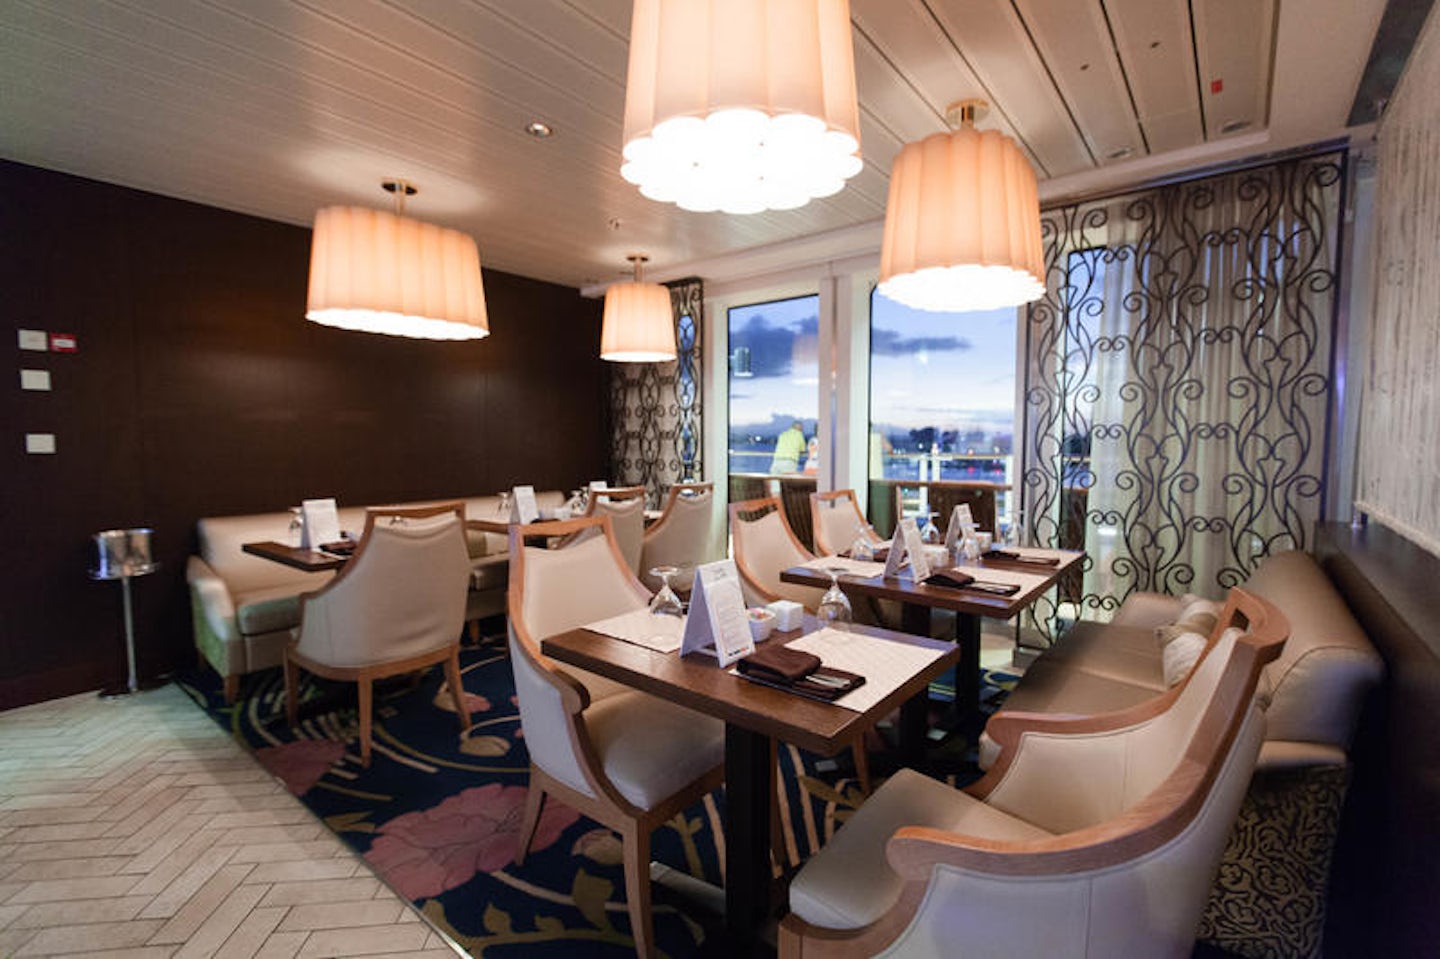 Bistro on Five on Celebrity Silhouette